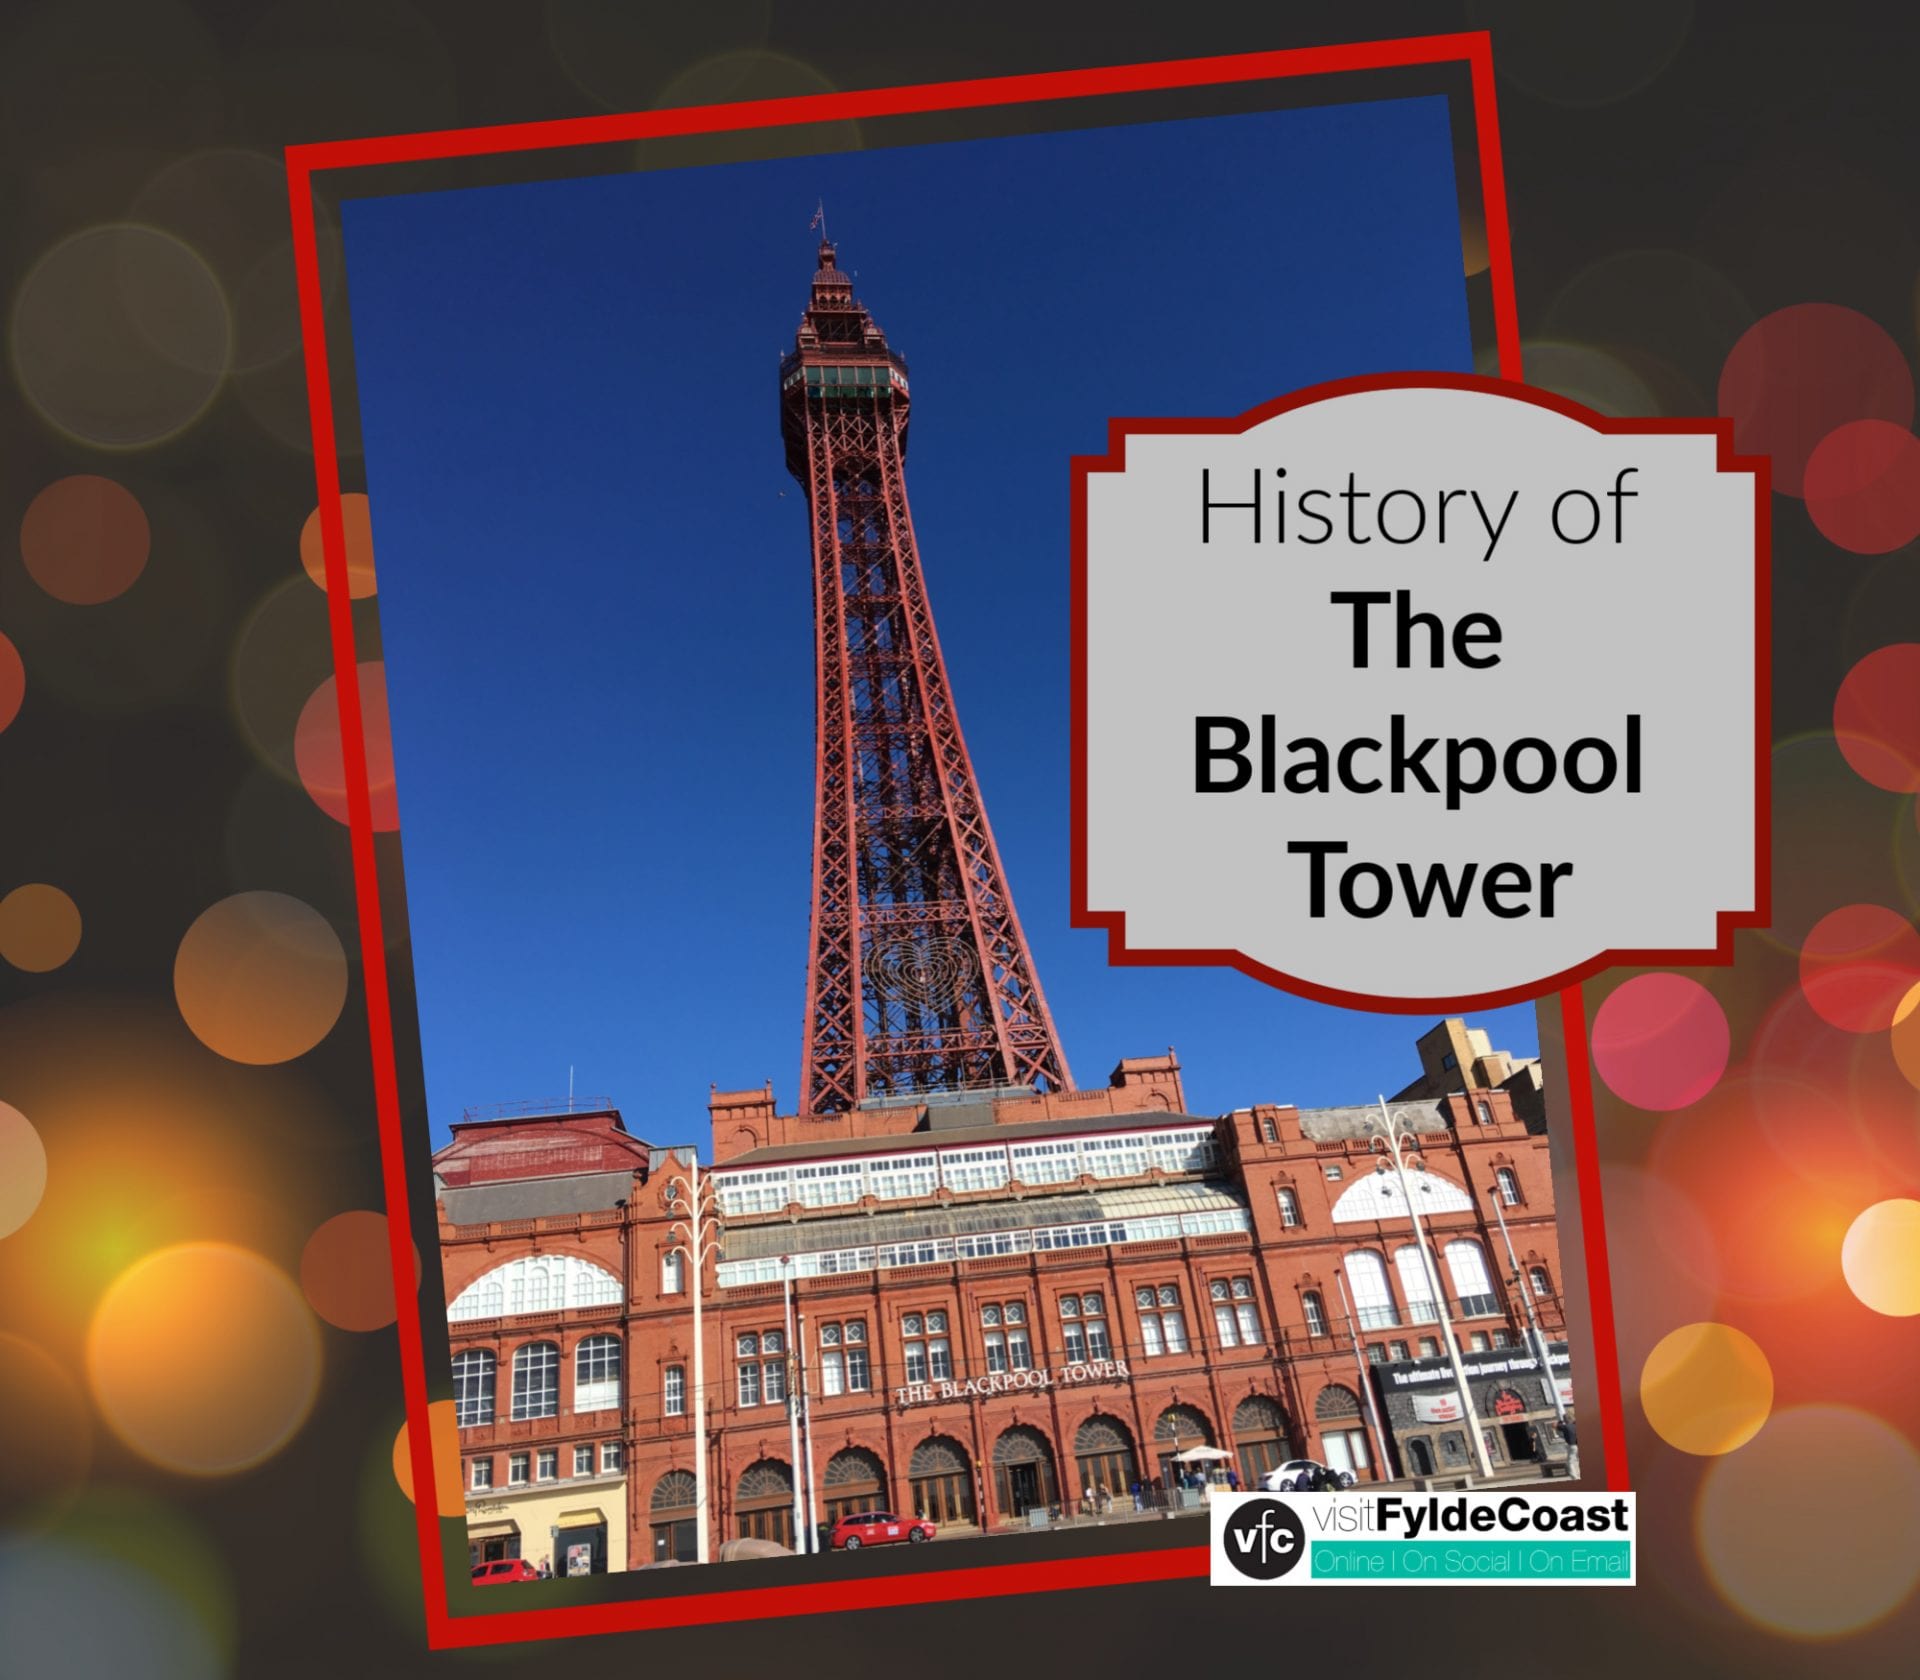 History of the Blackpool Tower